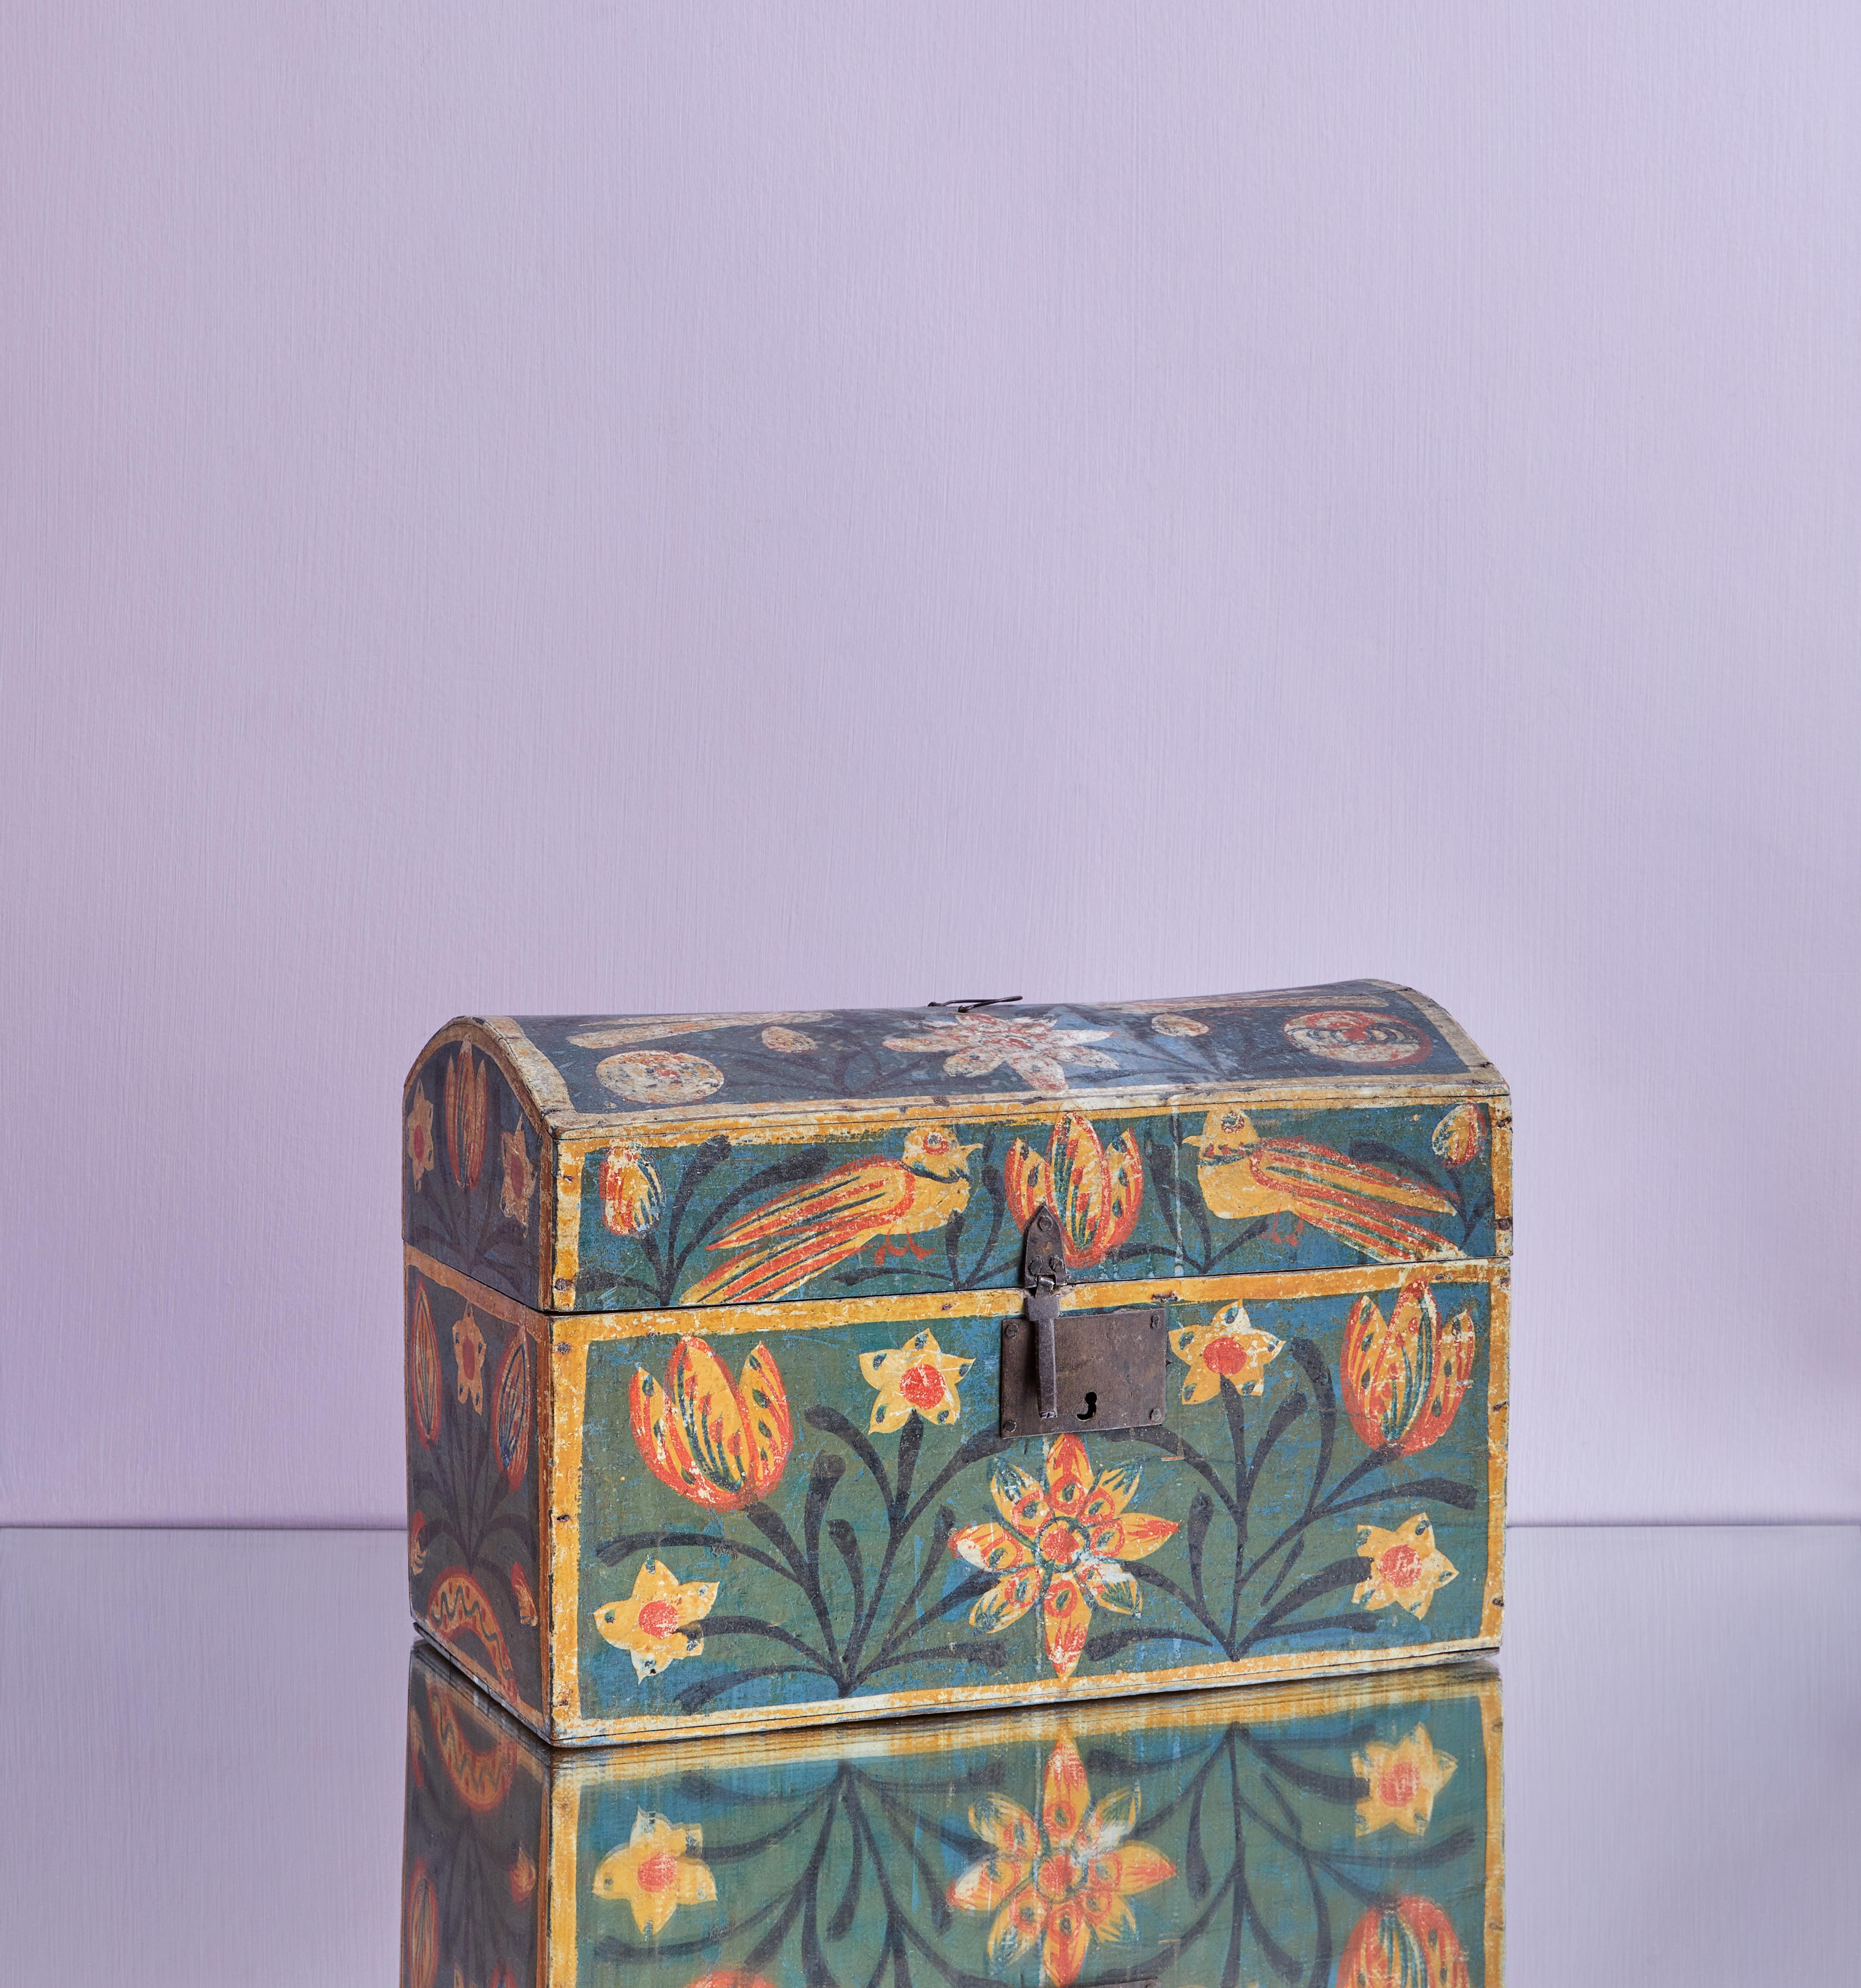 France, late 19th century

Vintage wedding chest in wood painted with flowers and birds.

Throughout history a wedding chest, also called a hope chest, is a piece of furniture belonging to a young unmarried woman in anticipation of married life.